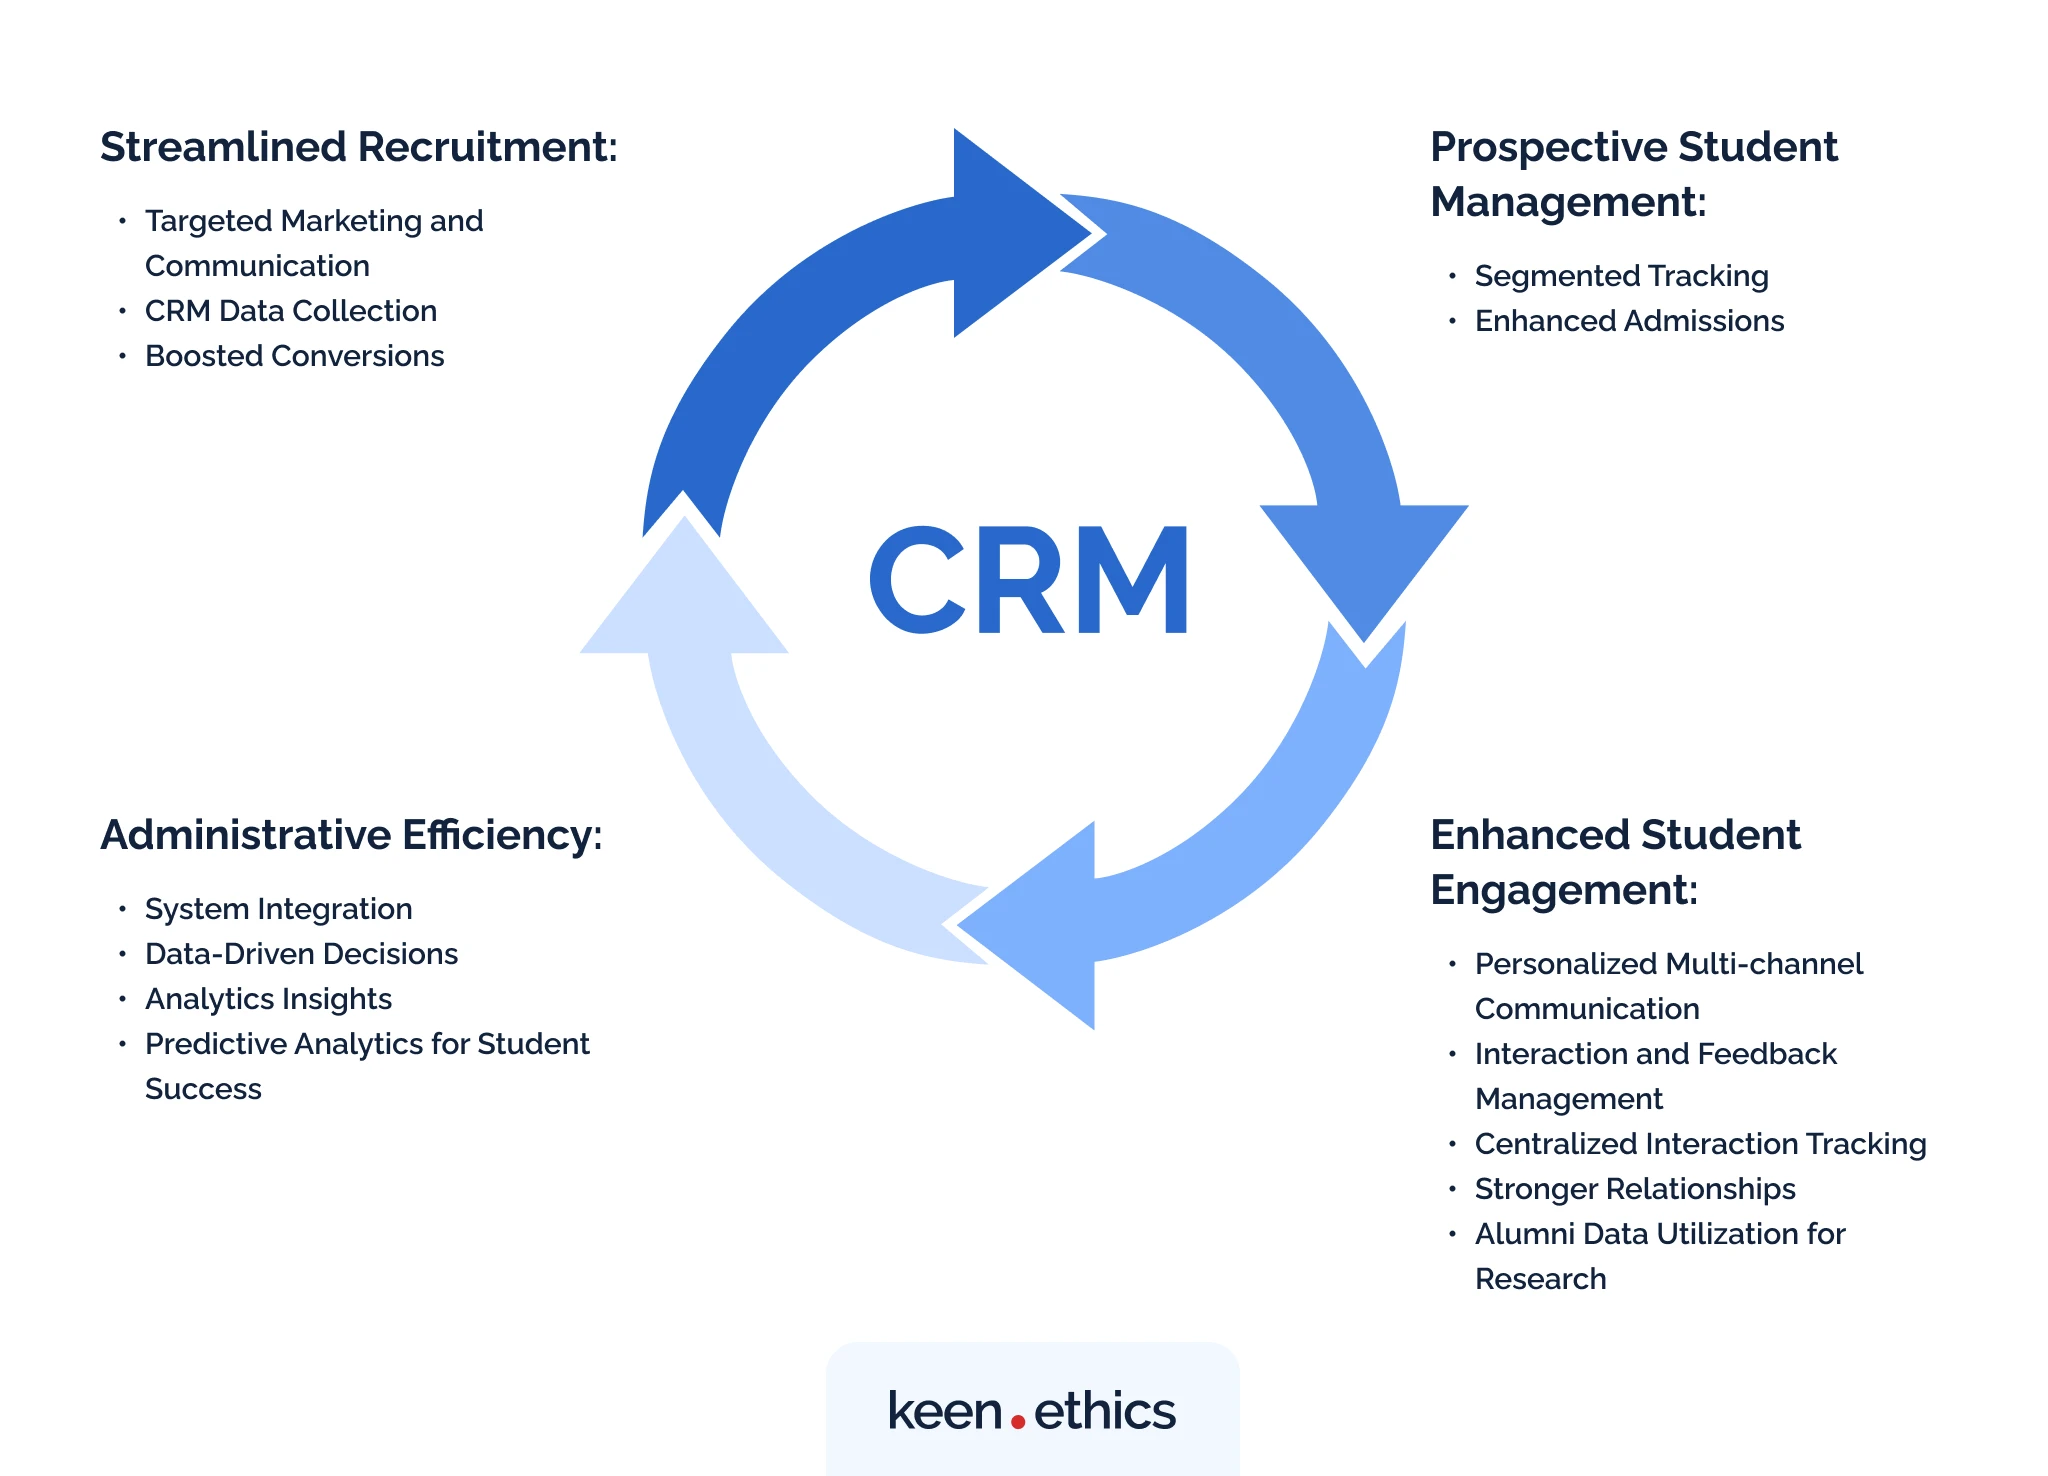 Benefits of CRM including four cycles